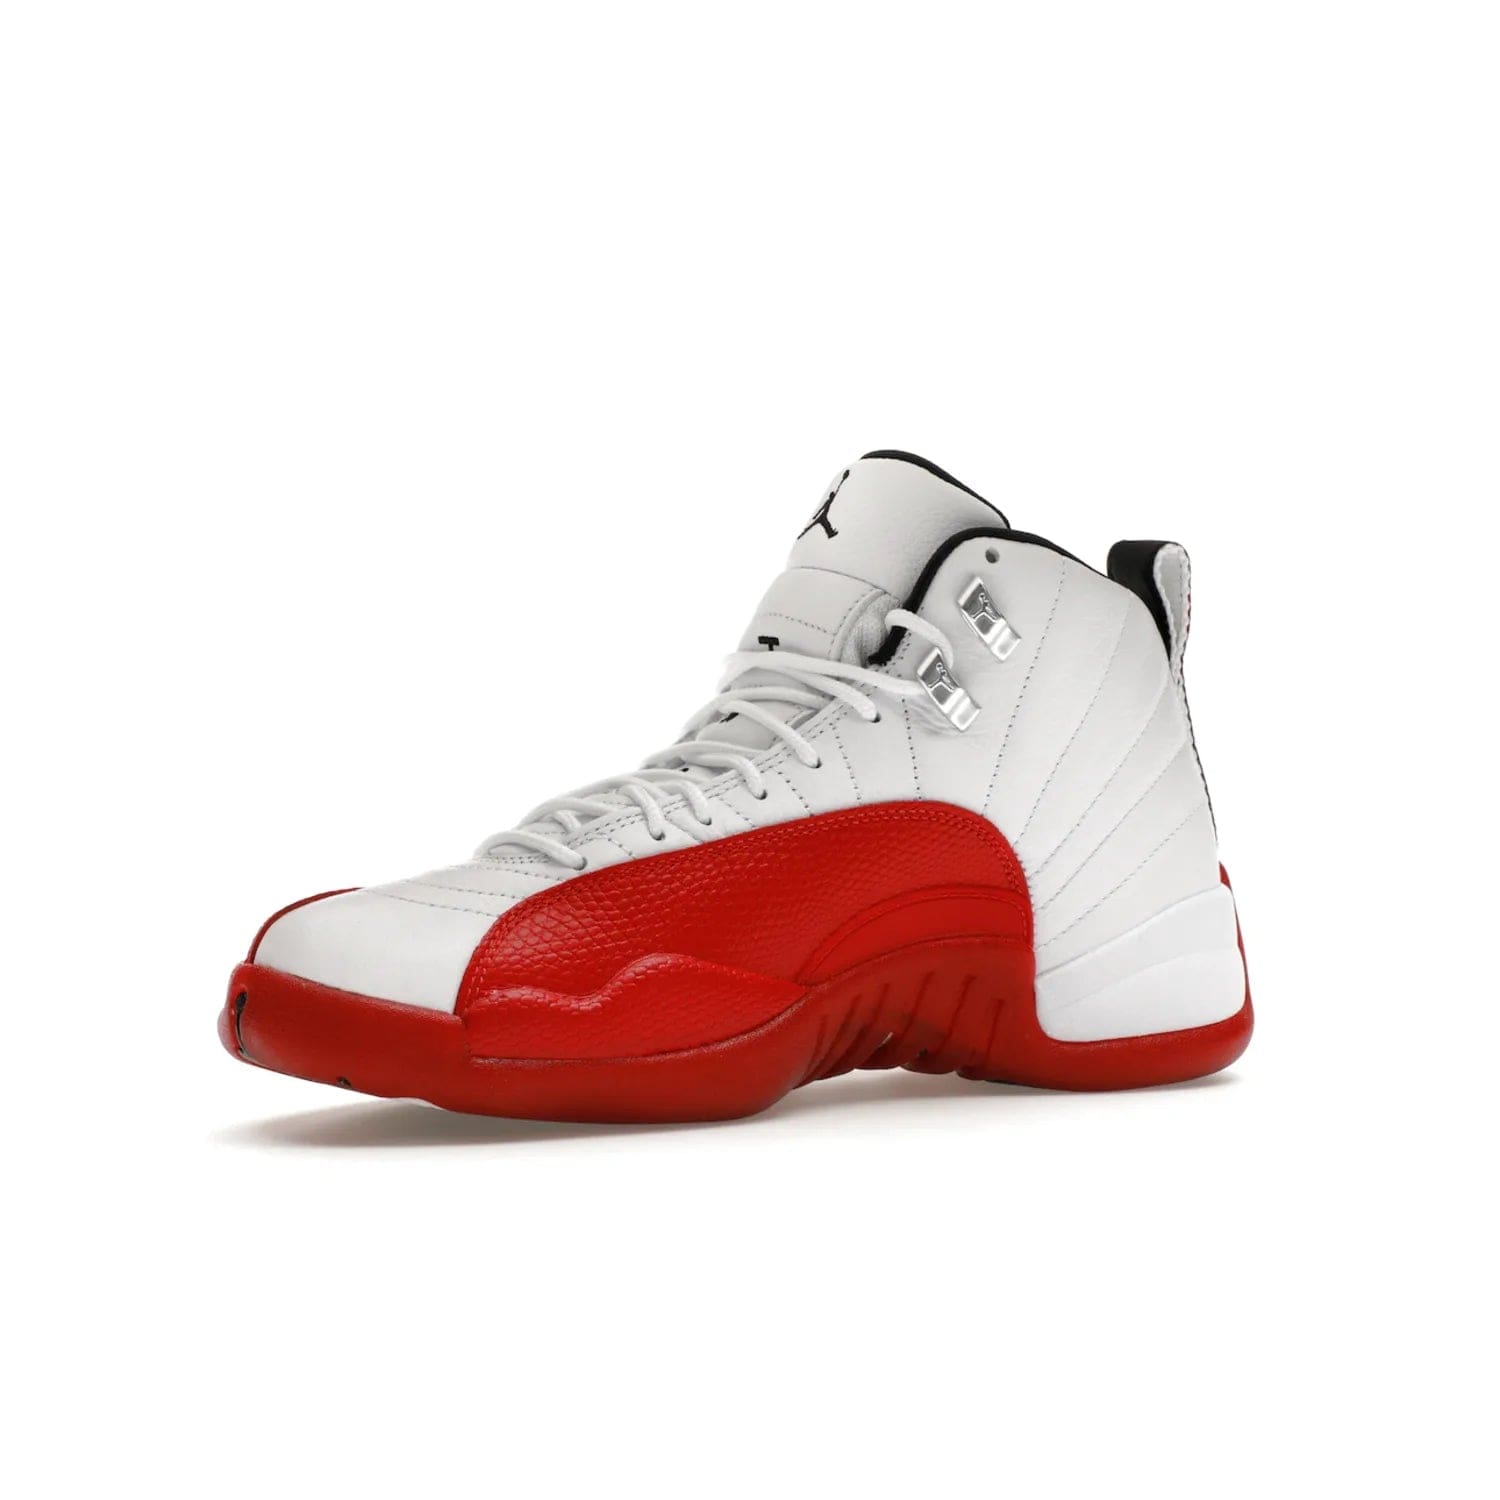 Jordan 12 Retro Cherry (2023) - Image 16 - Only at www.BallersClubKickz.com - Live your sneaker legend with the Jordan 12 Retro Cherry. Iconic pebbled leather mudguards, quilted uppers, and varsity red accents make this 1997 classic a must-have for 2023. Shine on with silver hardware and matching midsoles, and bring it all together for limited-edition style on October 28th. Step into Jordan legacy with the Retro Cherry.